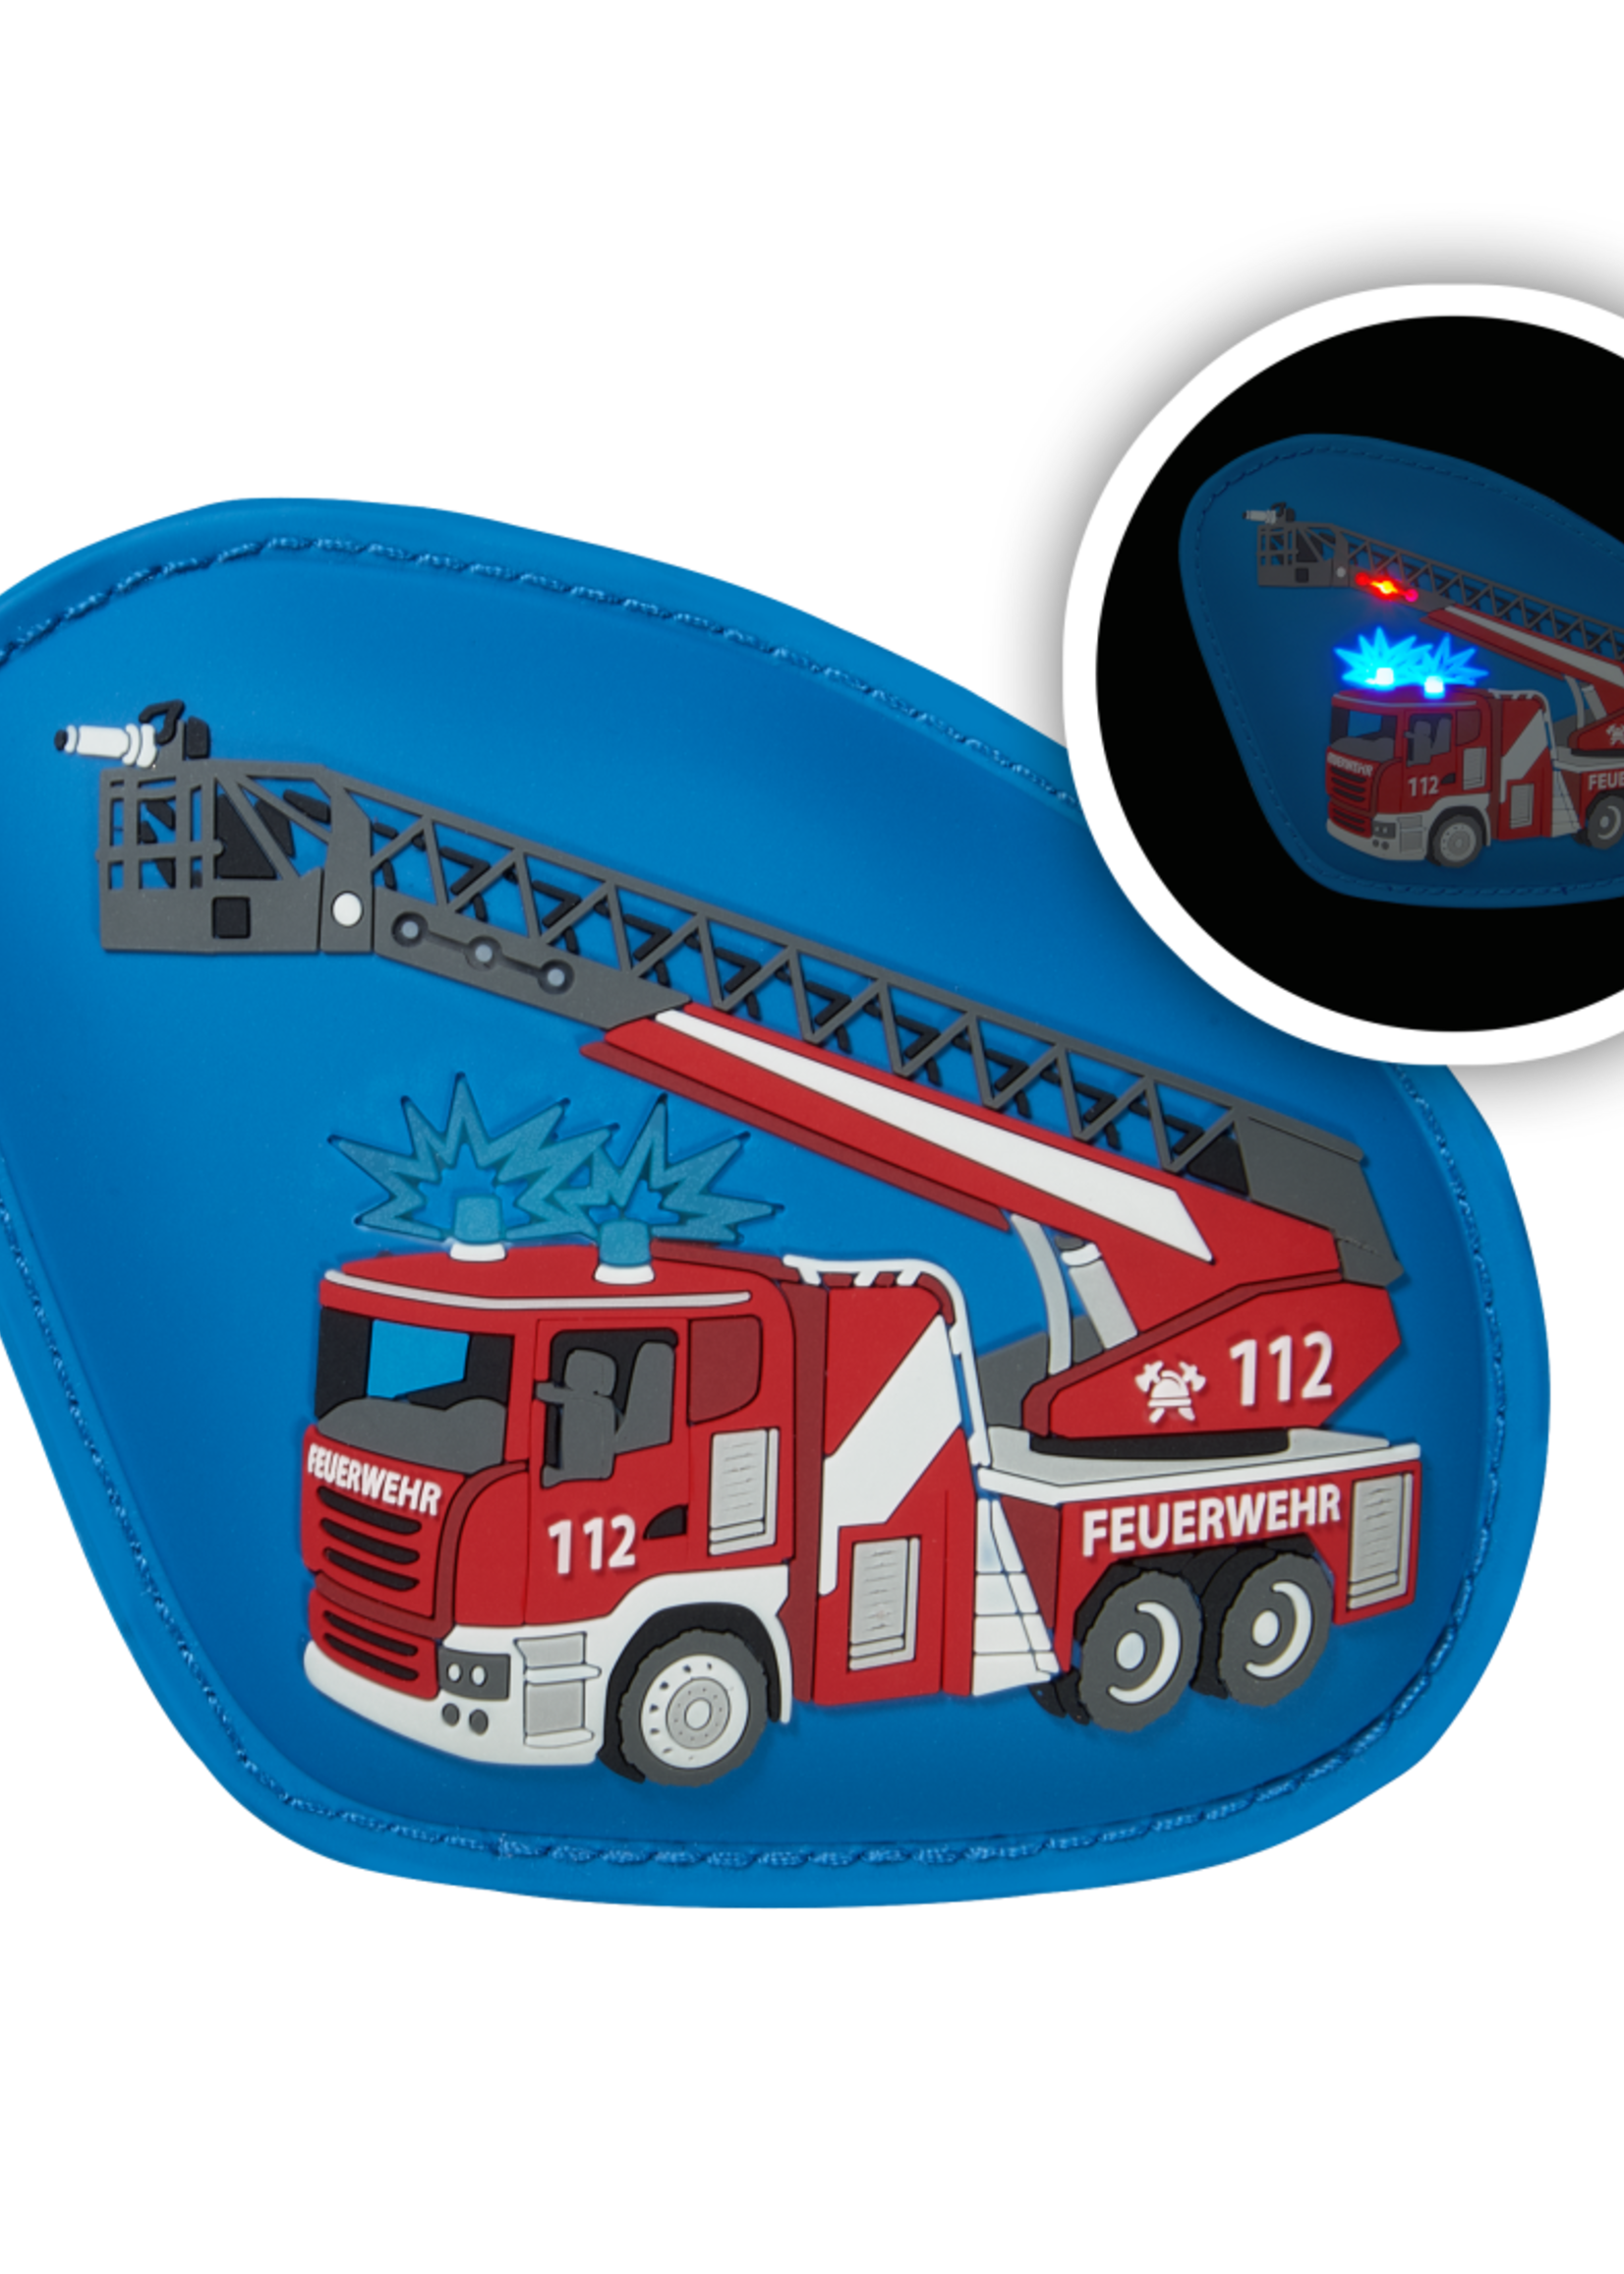 Step by Step MAGIC MAGS FLASH "Fire Engine